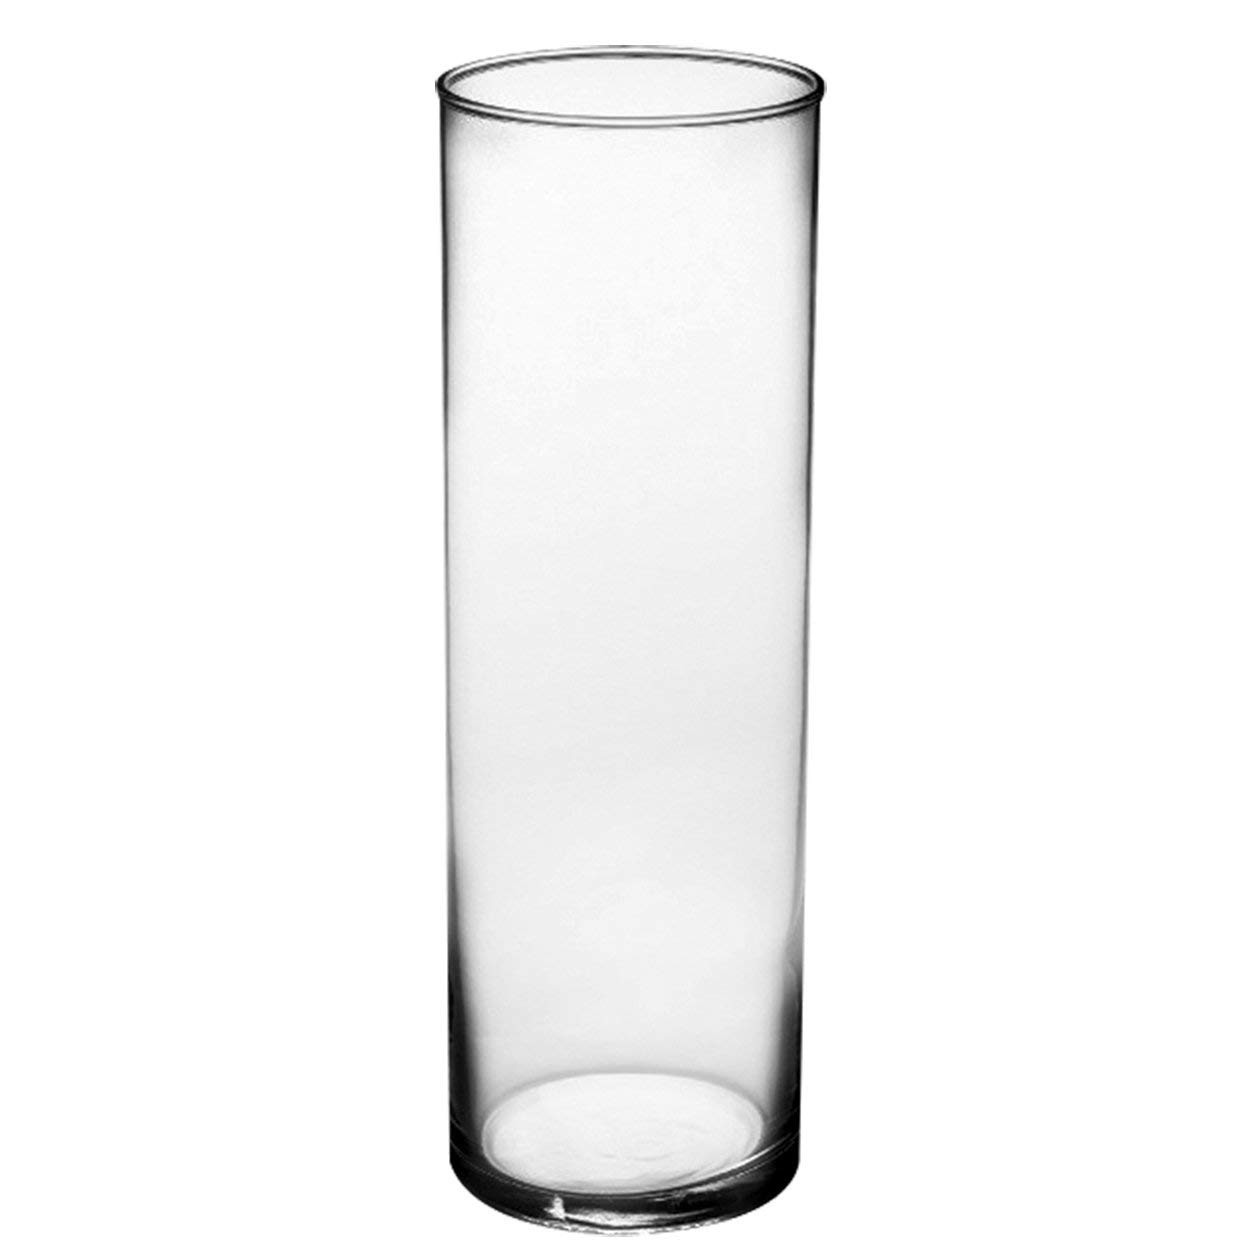 23 Best Tall Black Glass Vase 2024 free download tall black glass vase of amazon com syndicate sales 3 1 2 x 10 1 2 cylinder vase clear for amazon com syndicate sales 3 1 2 x 10 1 2 cylinder vase clear planters garden outdoor